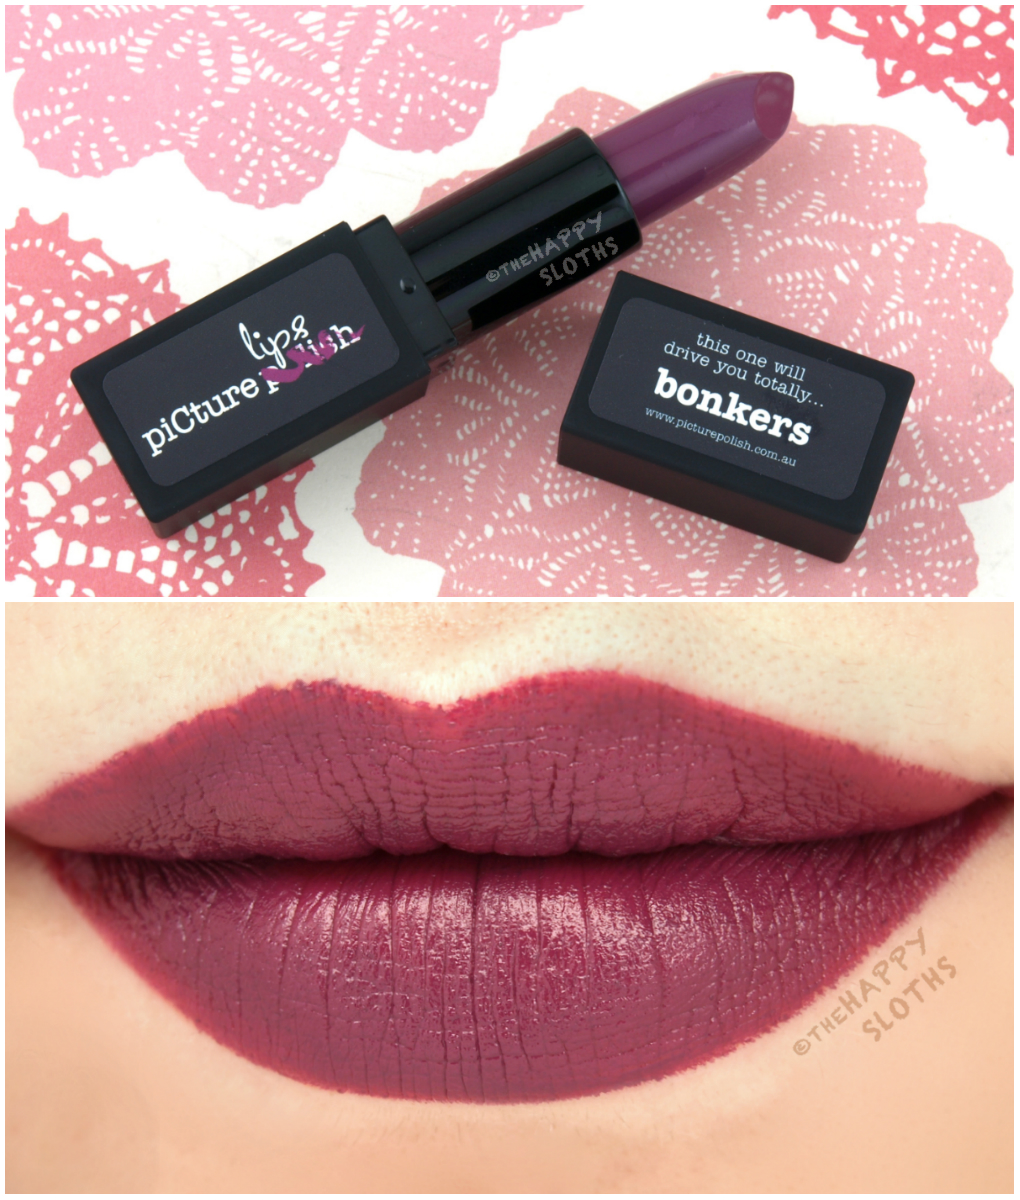 Picture Polish Matte Lipstick in Bonkers: Review and Swatches